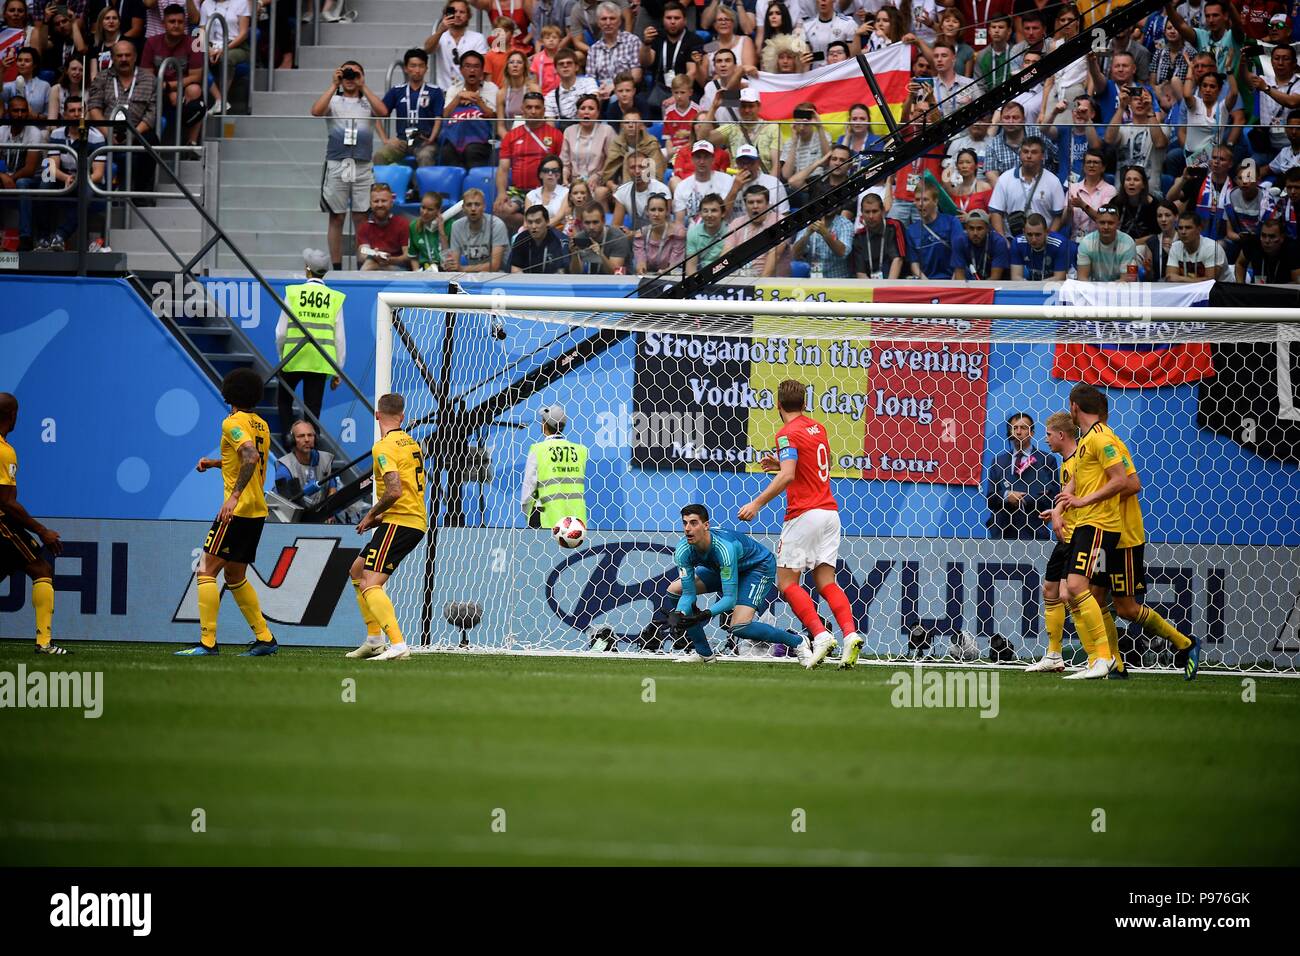 July 14th, 2018, St Petersburg, Russia. Thibaut Courtois( goal Keeper) of Belgium in action during the 2018 FIFA World Cup Russia match between England and Belgium at Saint-Petersburg Stadium, Russia. Shoja Lak/Alamy Live News Stock Photo